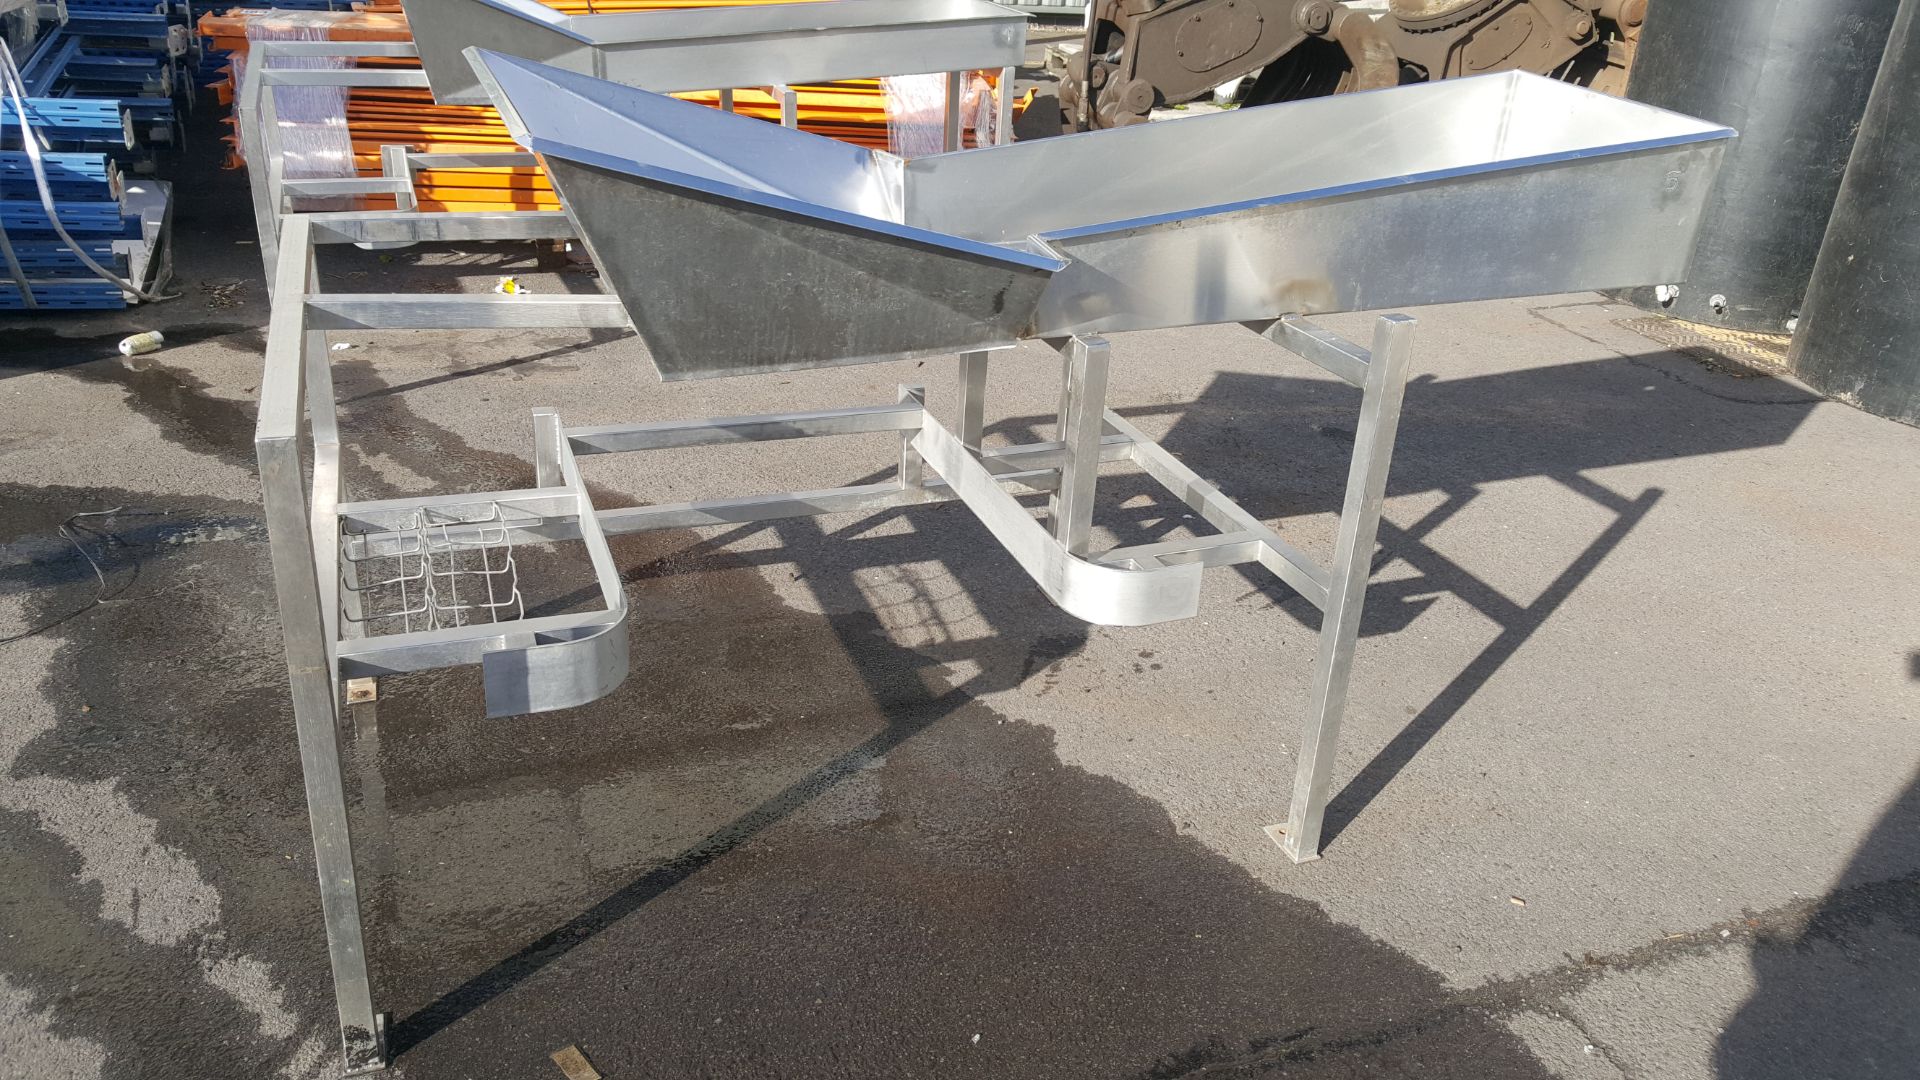 Stainless steel sorting chute on frame - Image 2 of 2